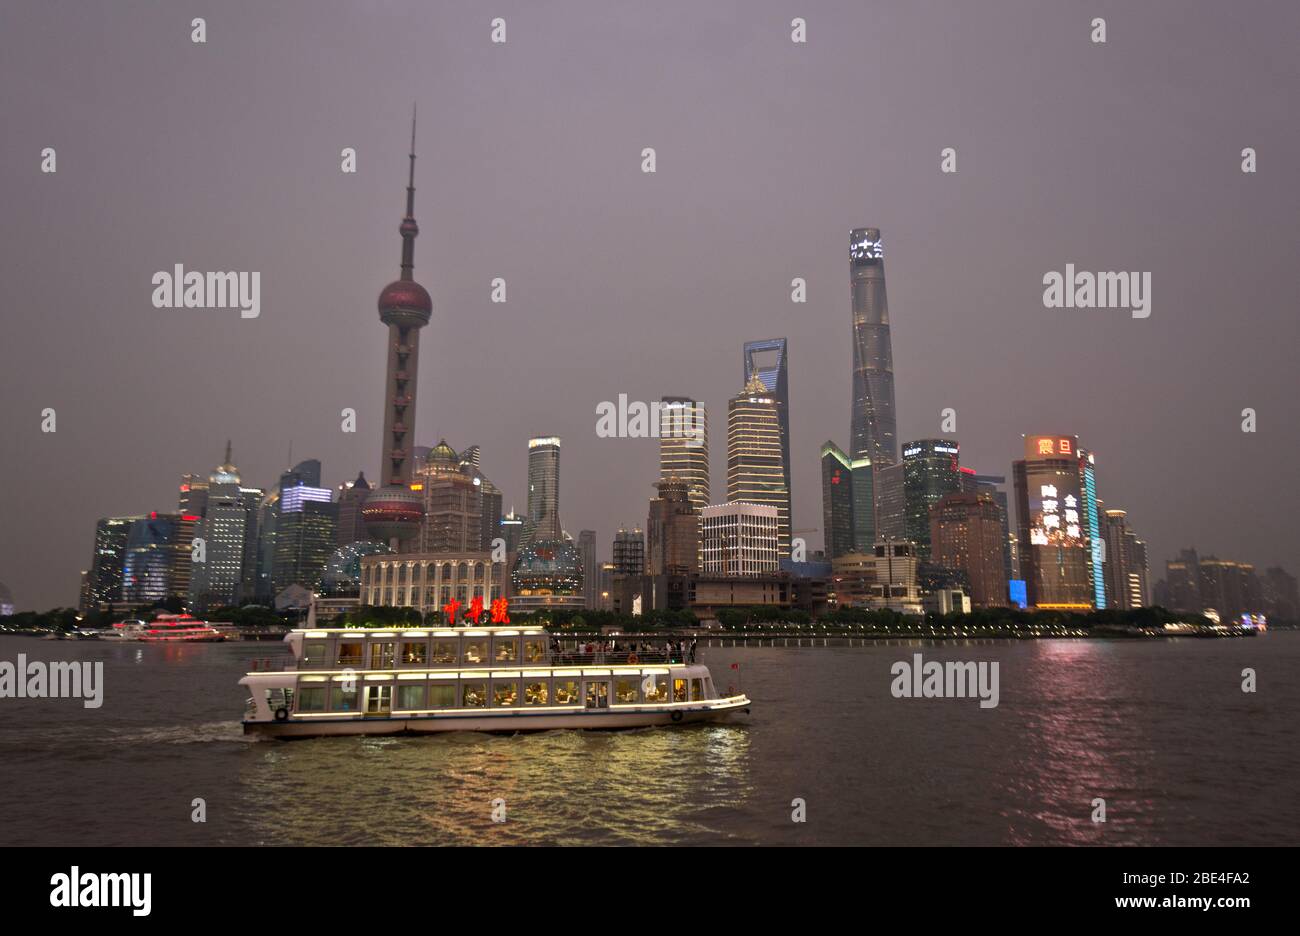 Shanghai's Pudong skyline towers over the Huangpu River, view from The Bund at twilight. China Stock Photo